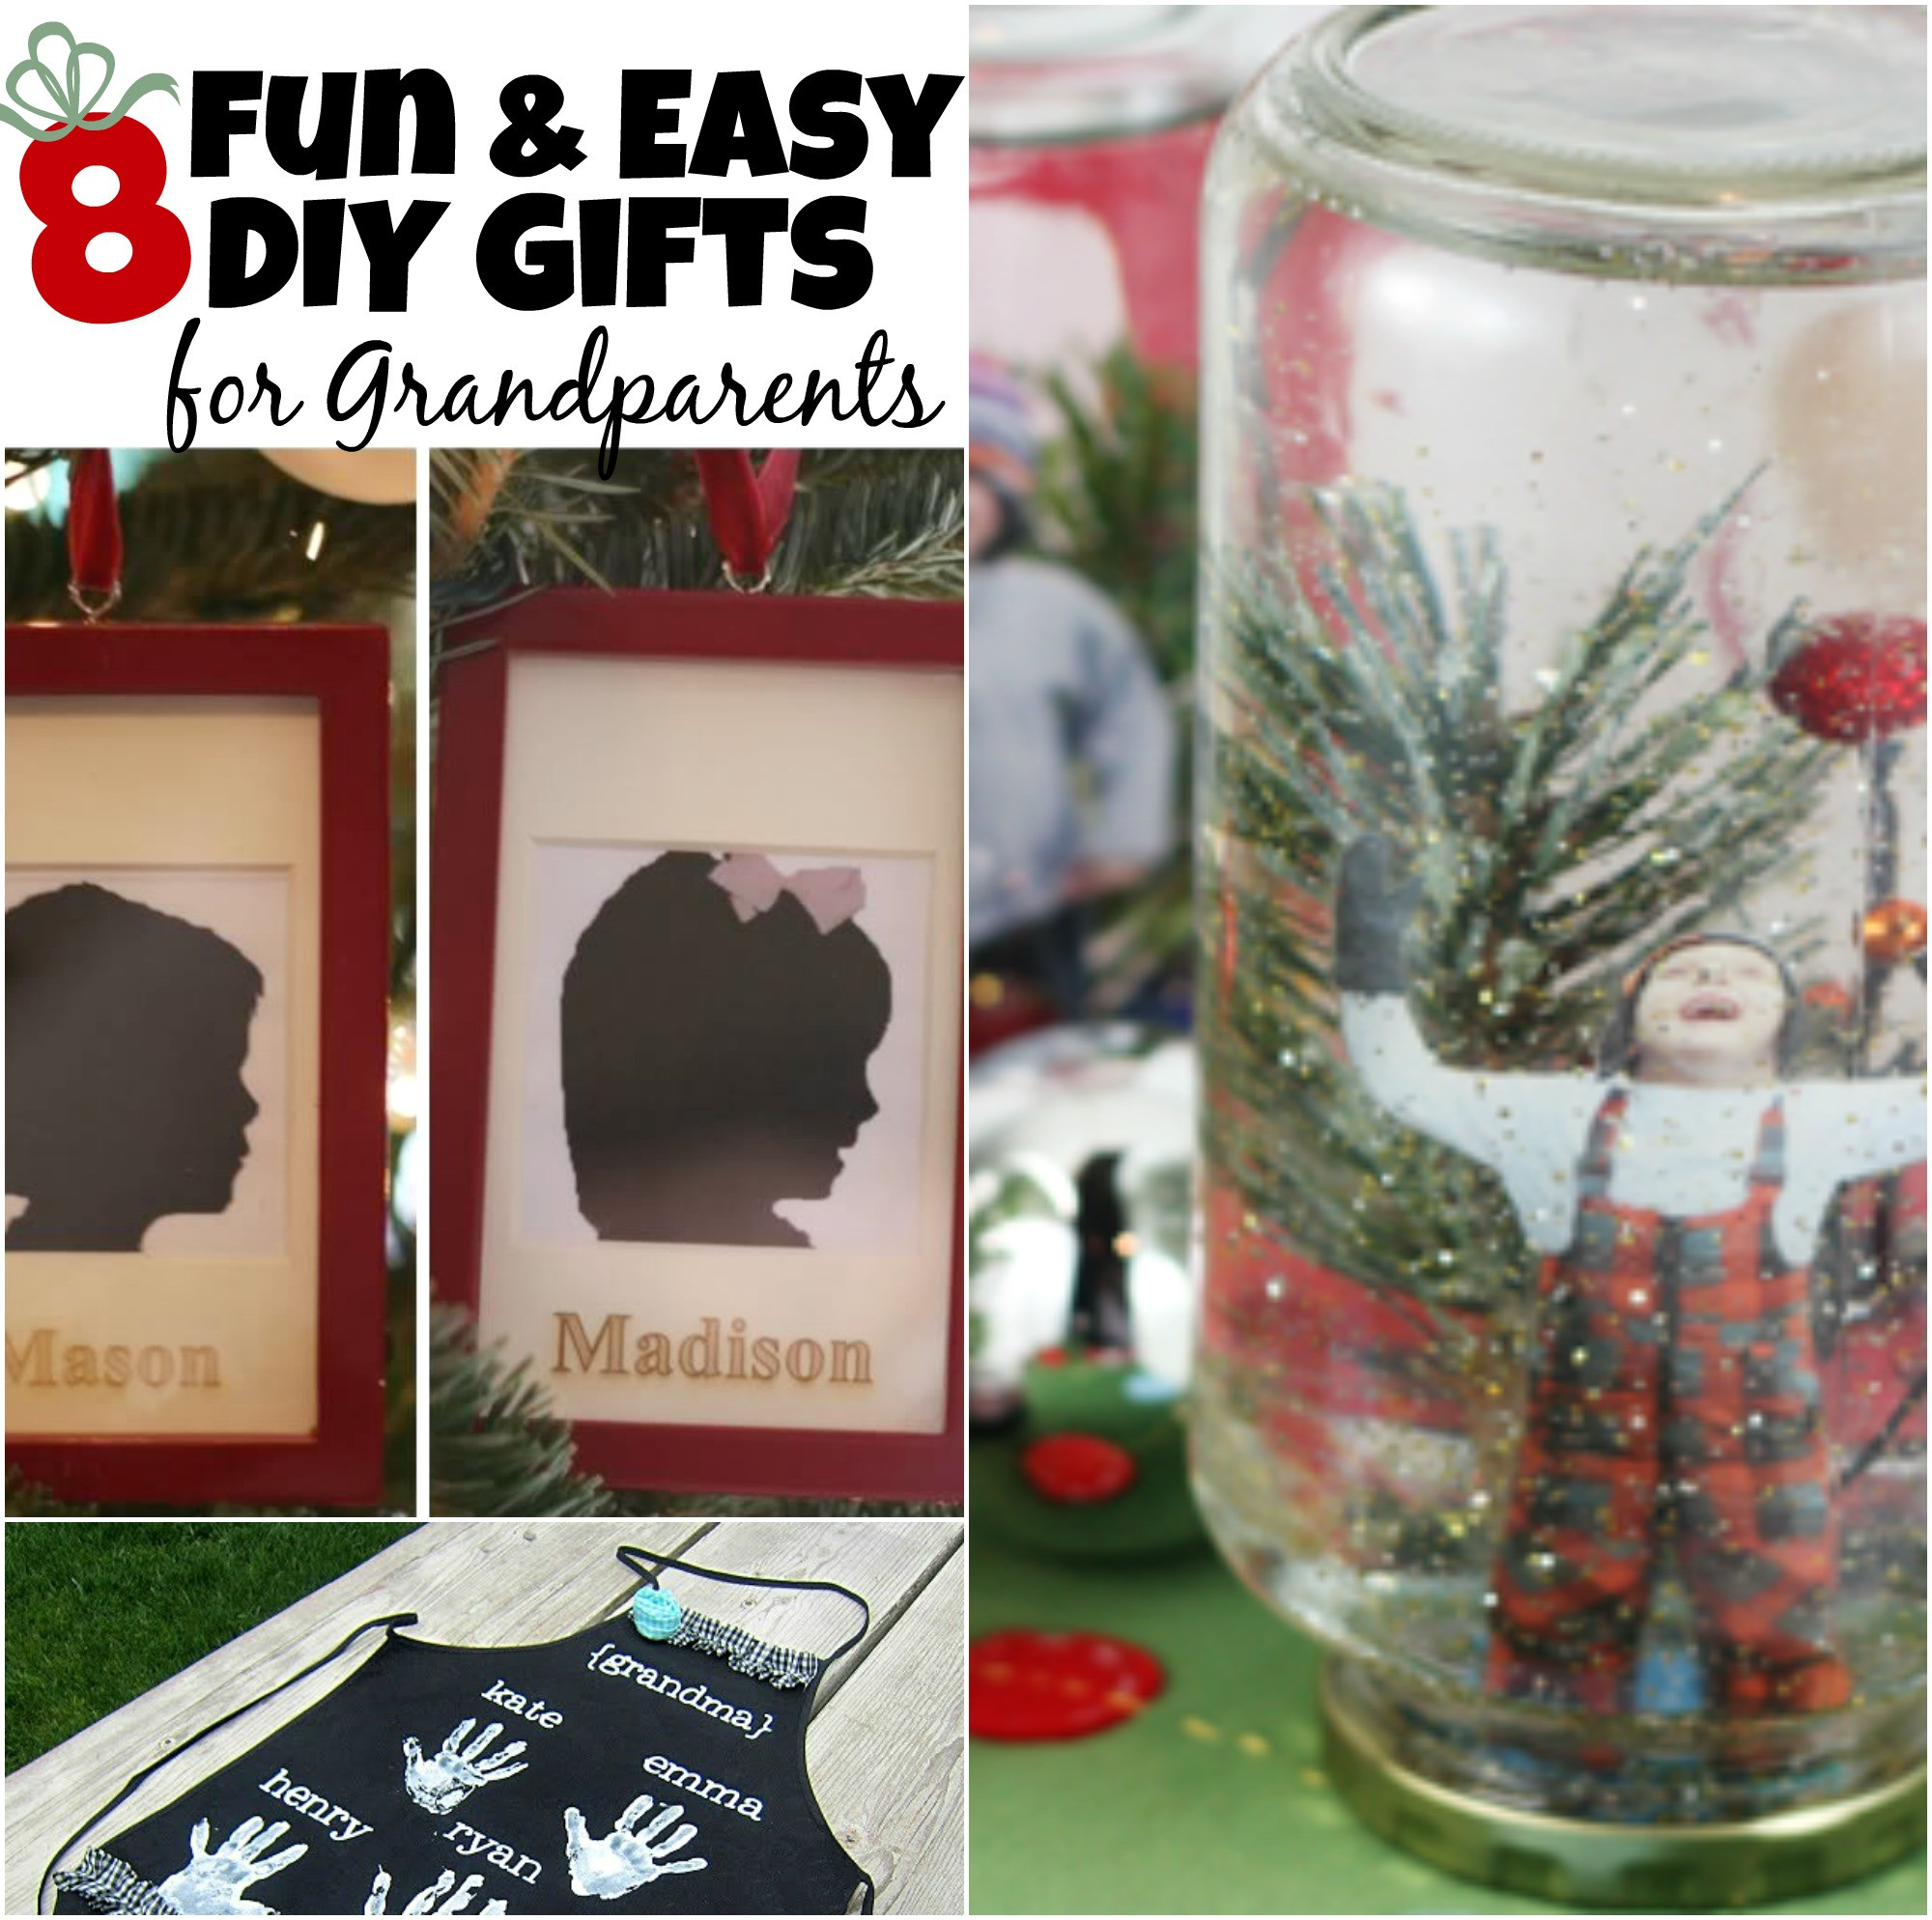 DIY Grandmother Gifts
 8 DIY Gifts for Grandparents The Realistic Mama